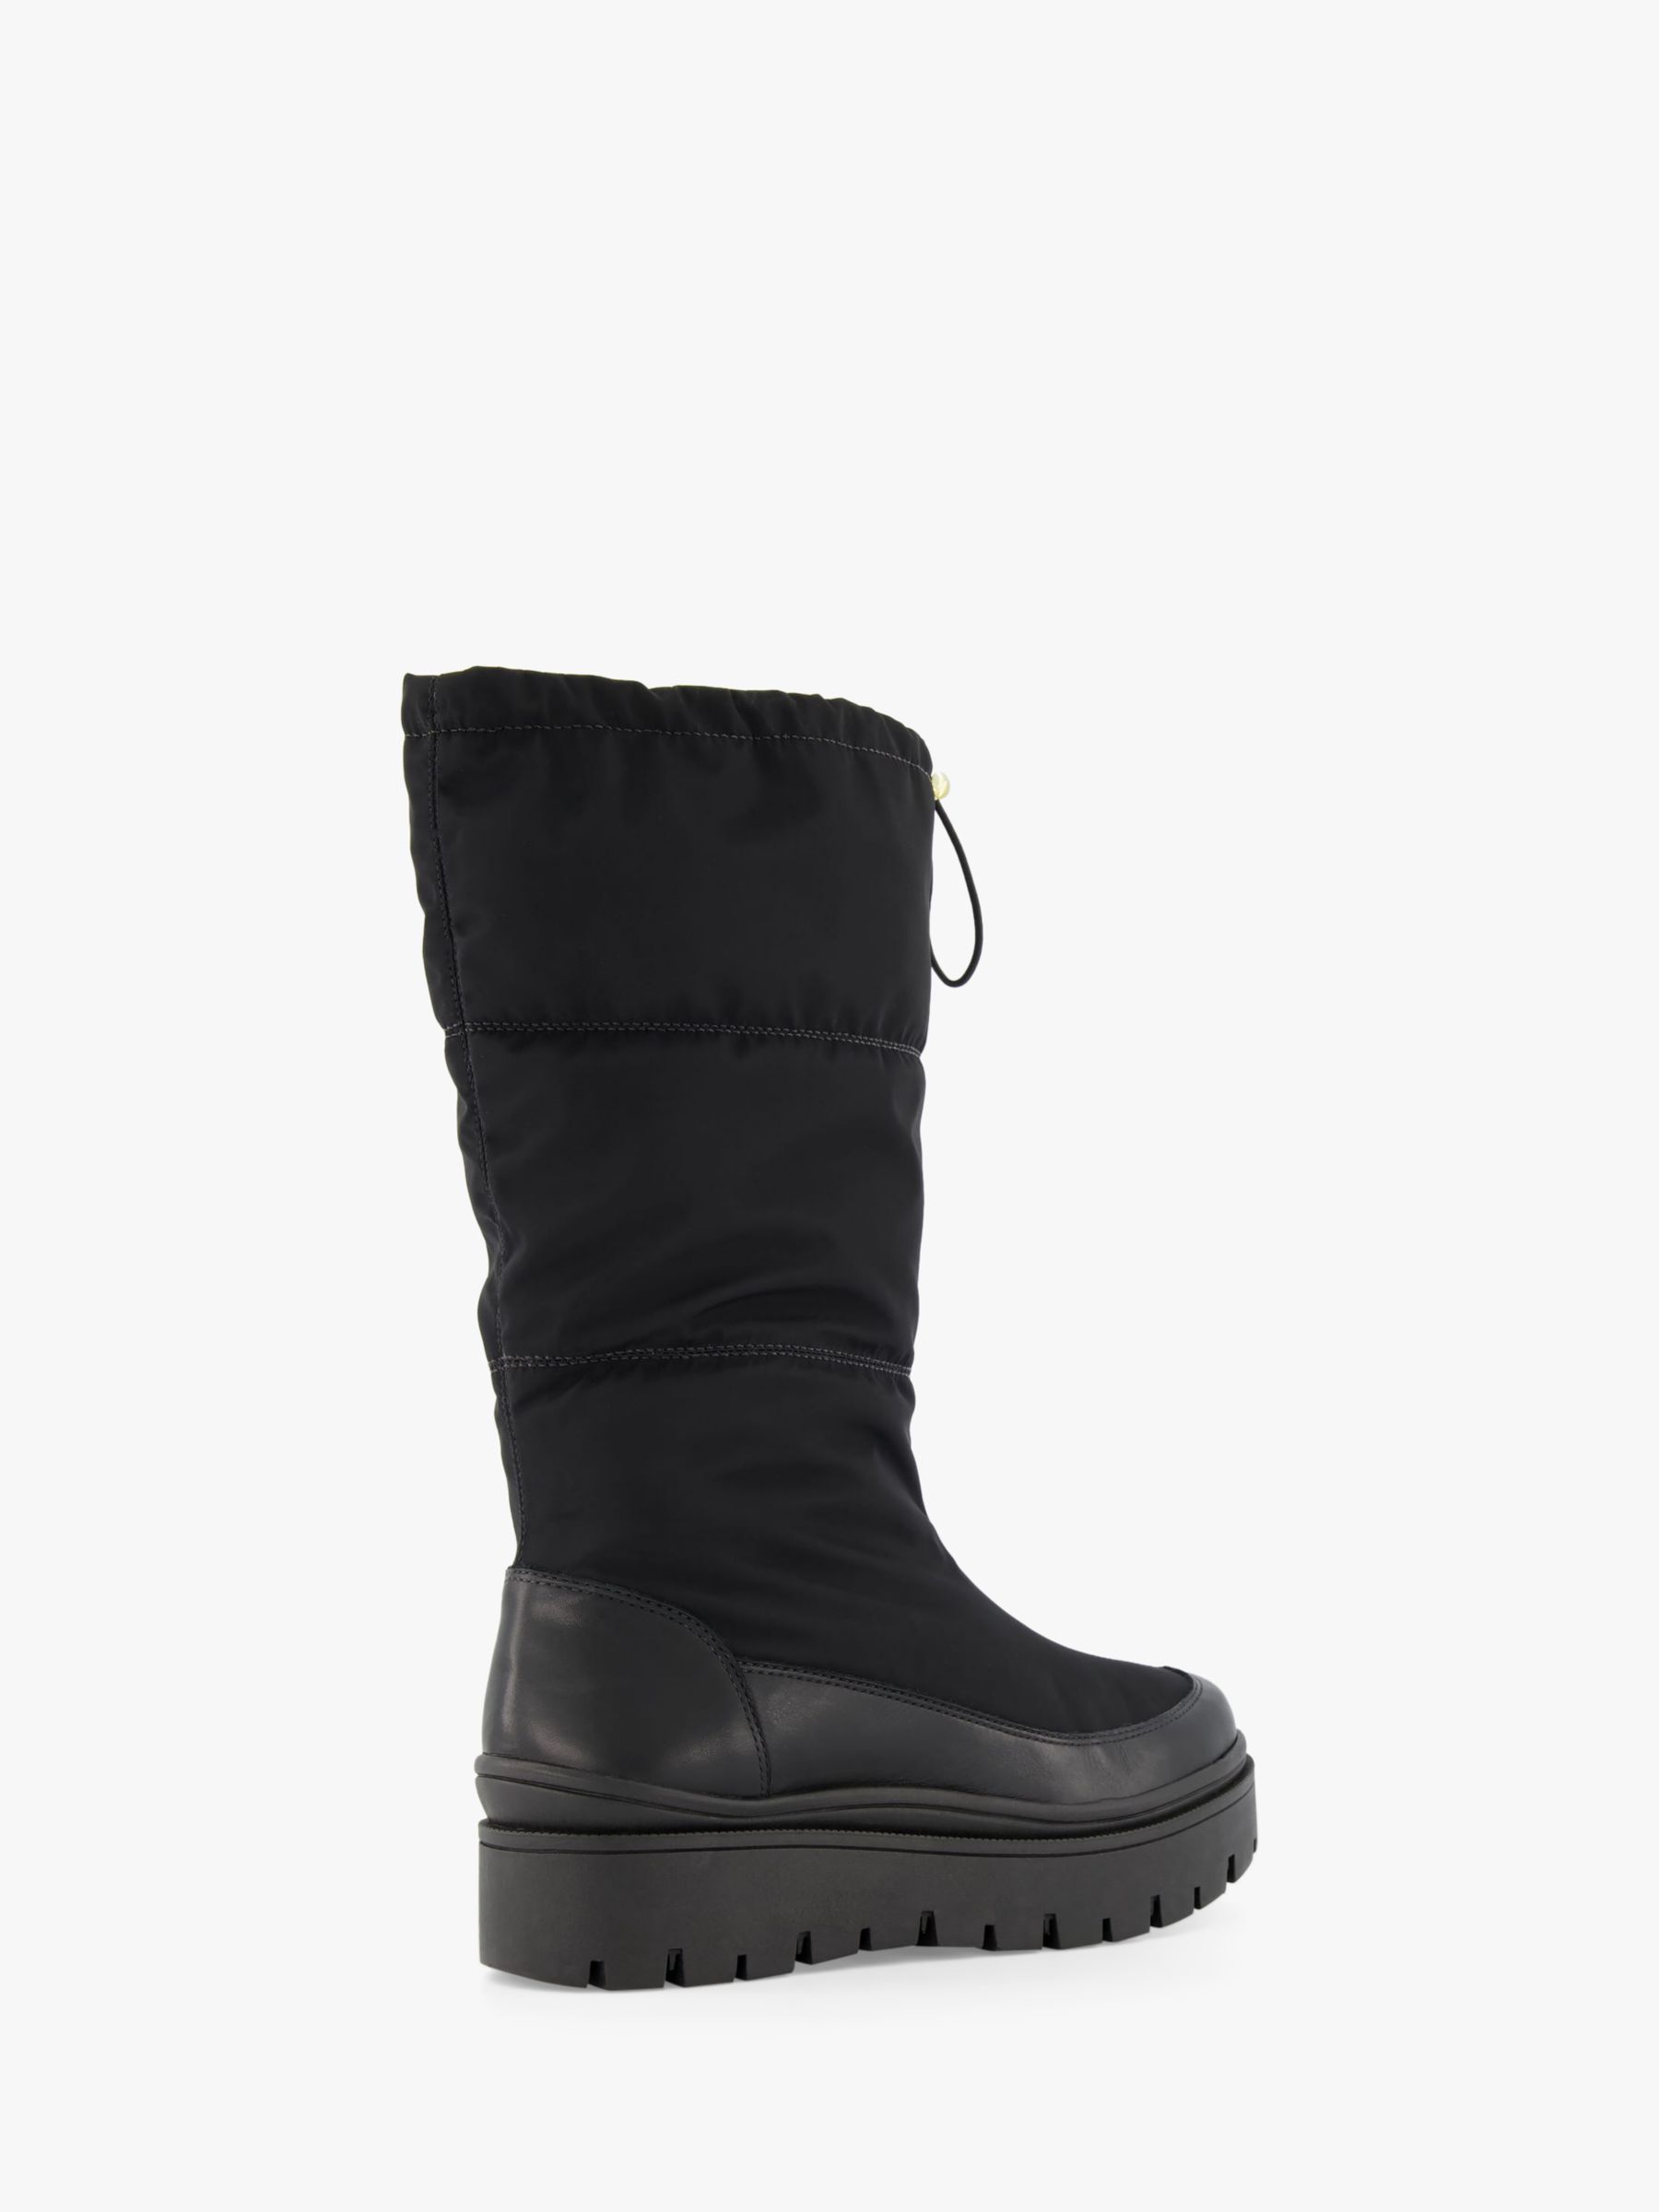 Dune Remmie Leather Fabric Calf Boots, Black at John Lewis & Partners